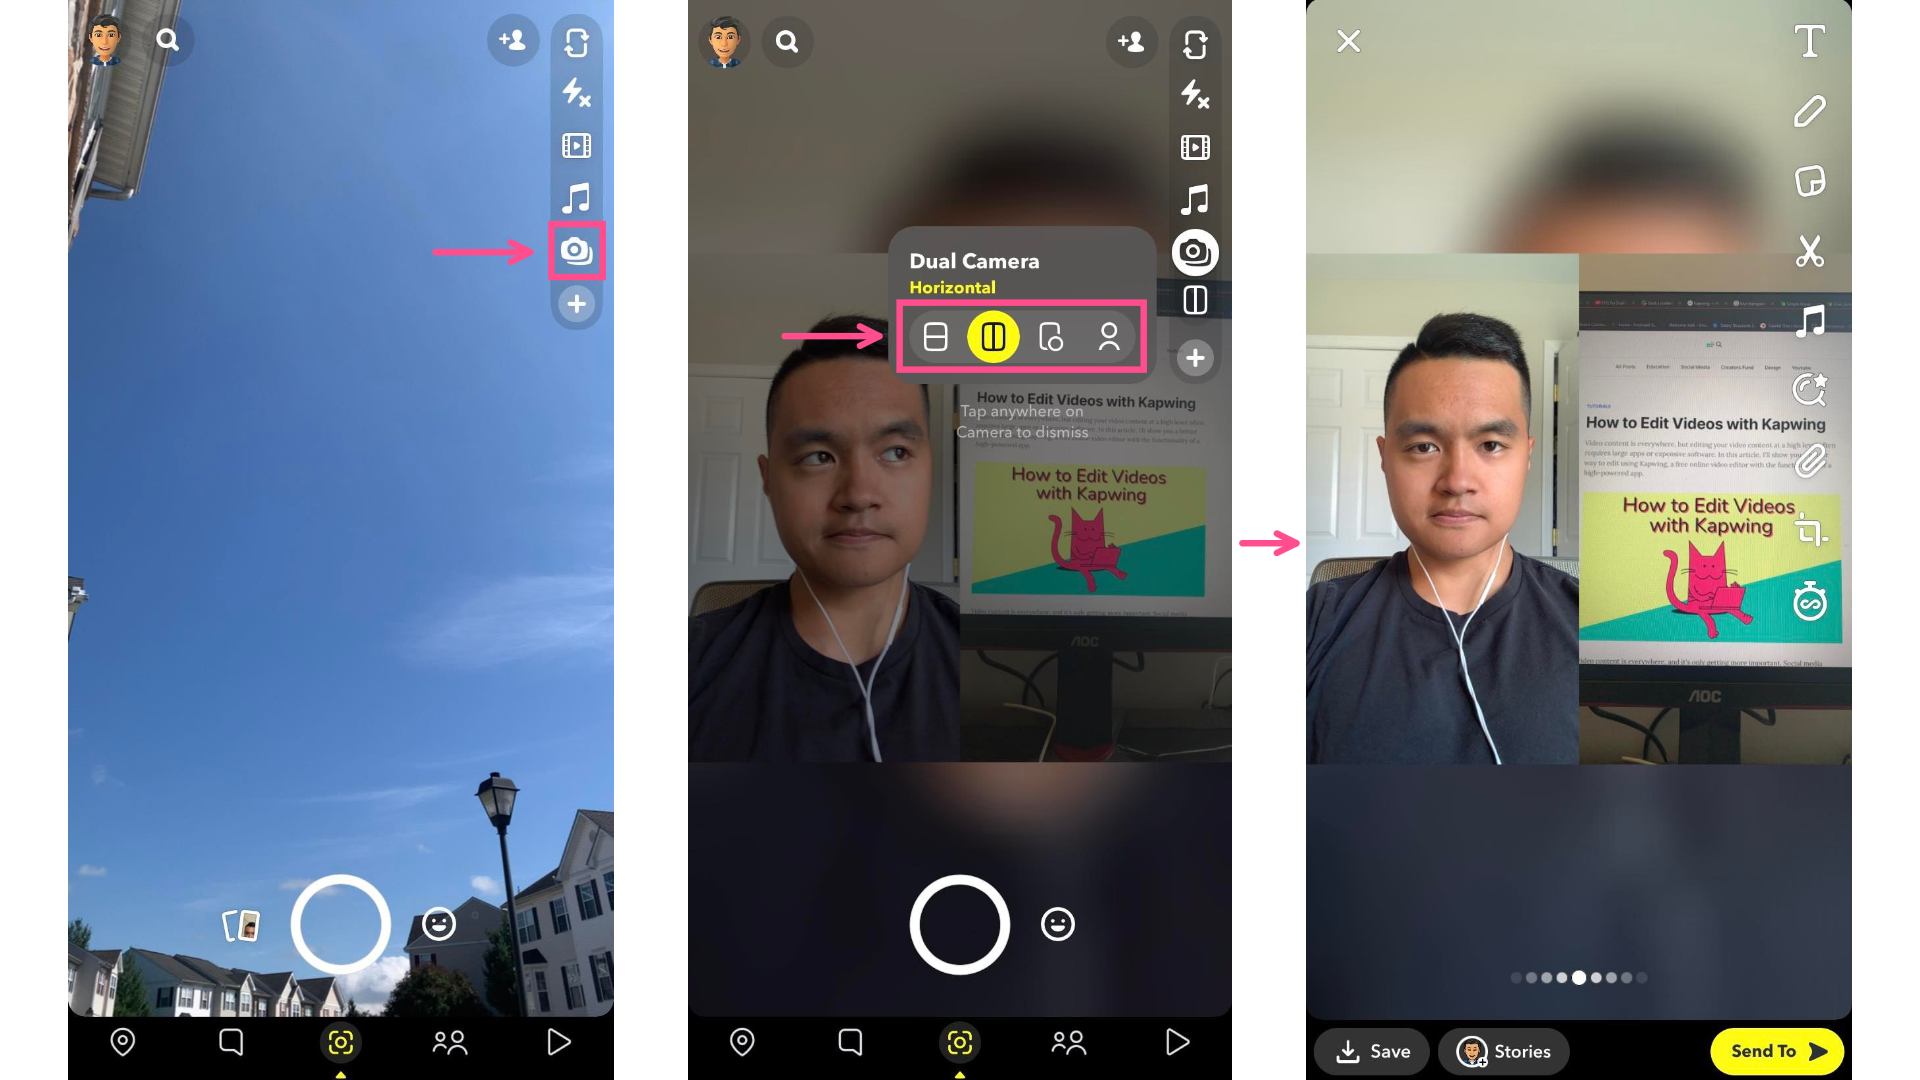 Screenshots showing how to access the Dual Camera feature on Snapchat via the Camera screen